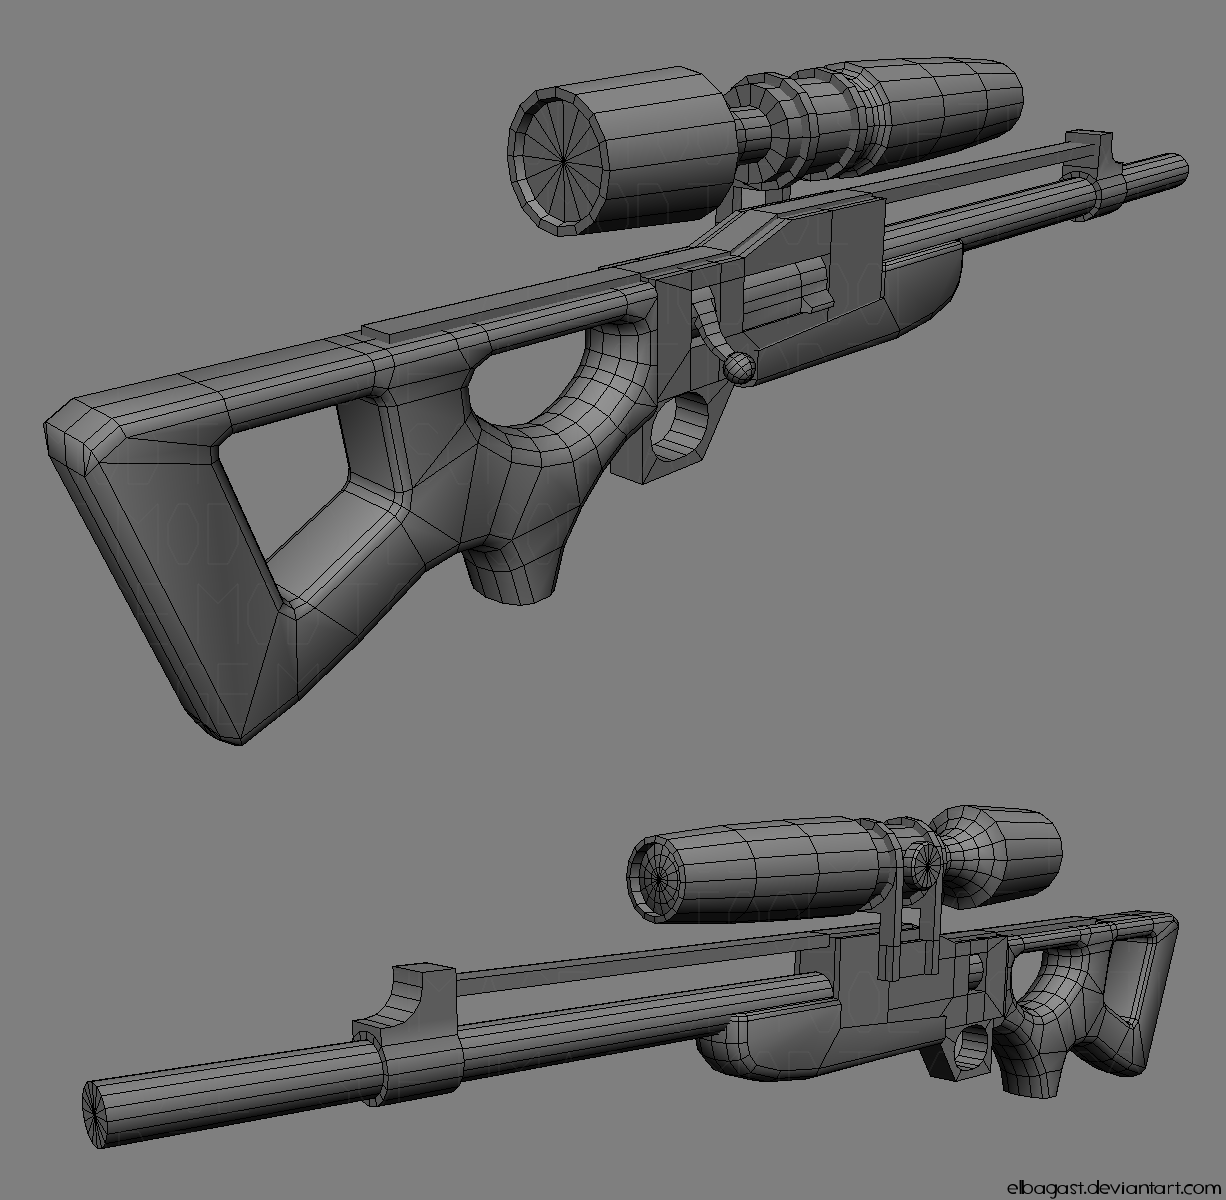 tf2_sniper_rifle_model_test_by_elbagast-d34gxuh.png